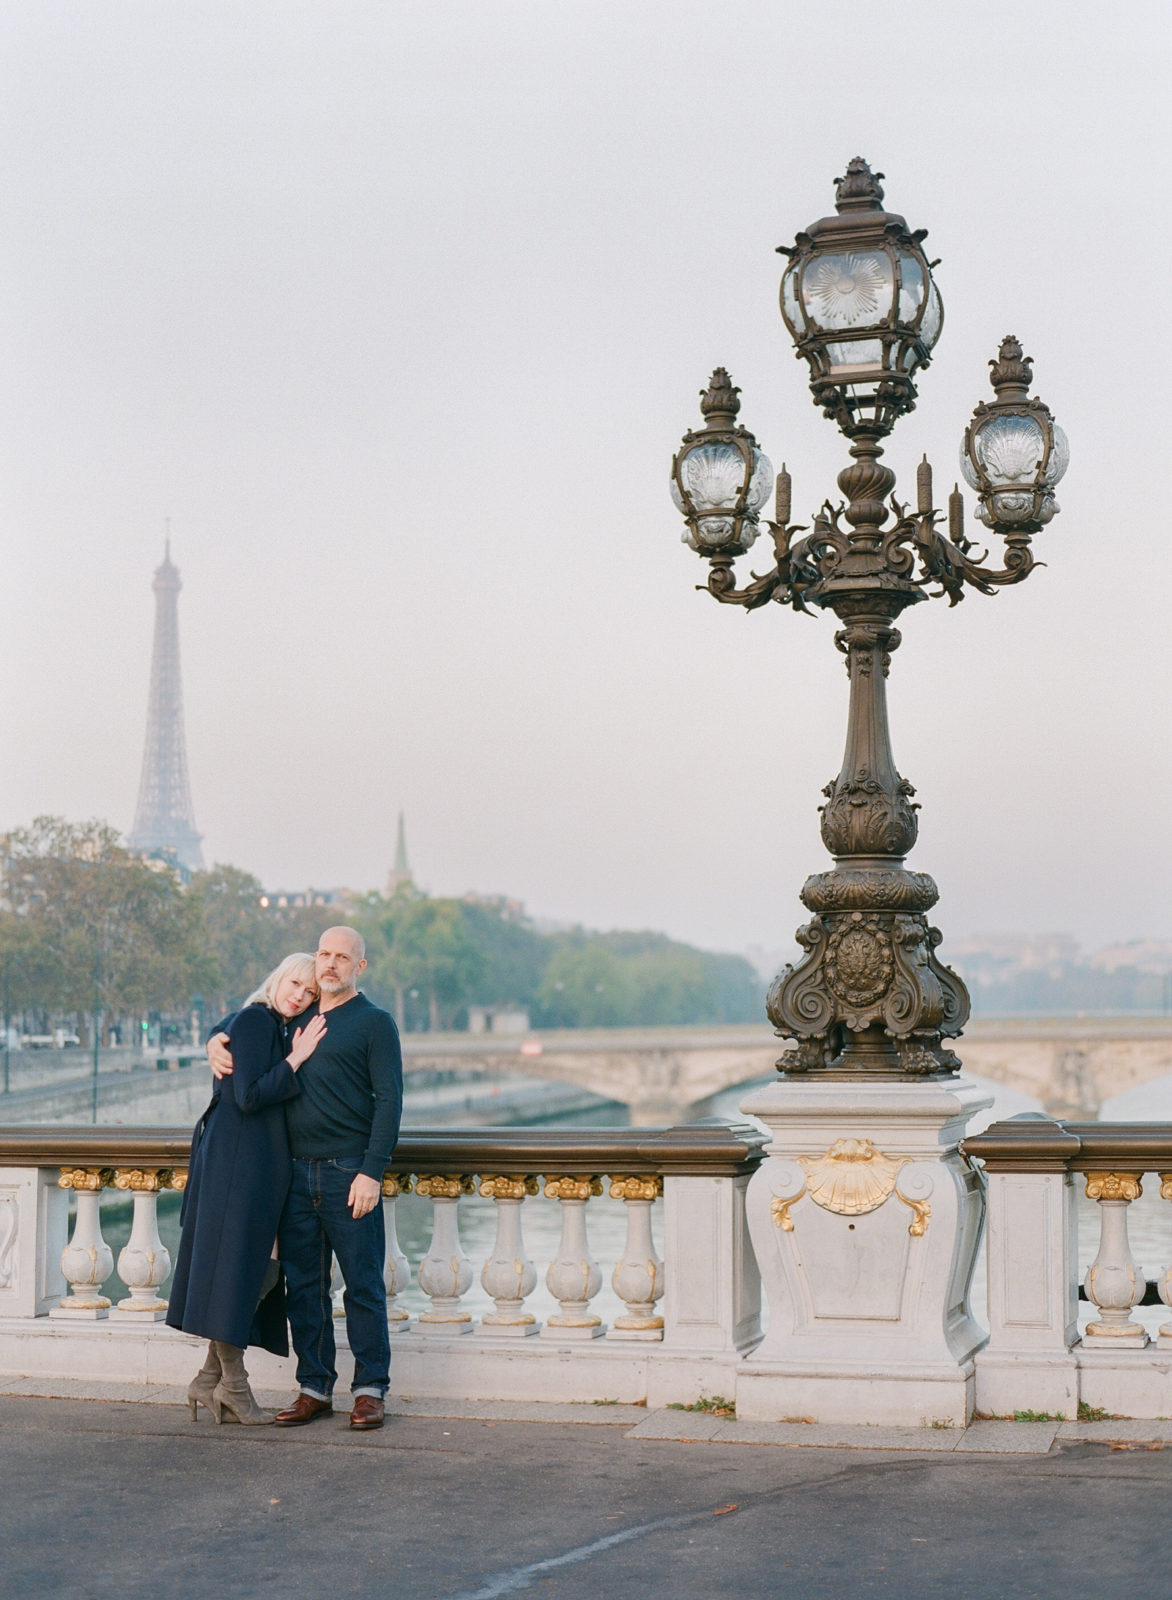 Fall Engagement Photos in Paris | Paris Film Photographer | Engagement Session | France Wedding Photographer | Isibieal Studio | Molly Carr Photography | Pont Alexandre III Engagement Photos